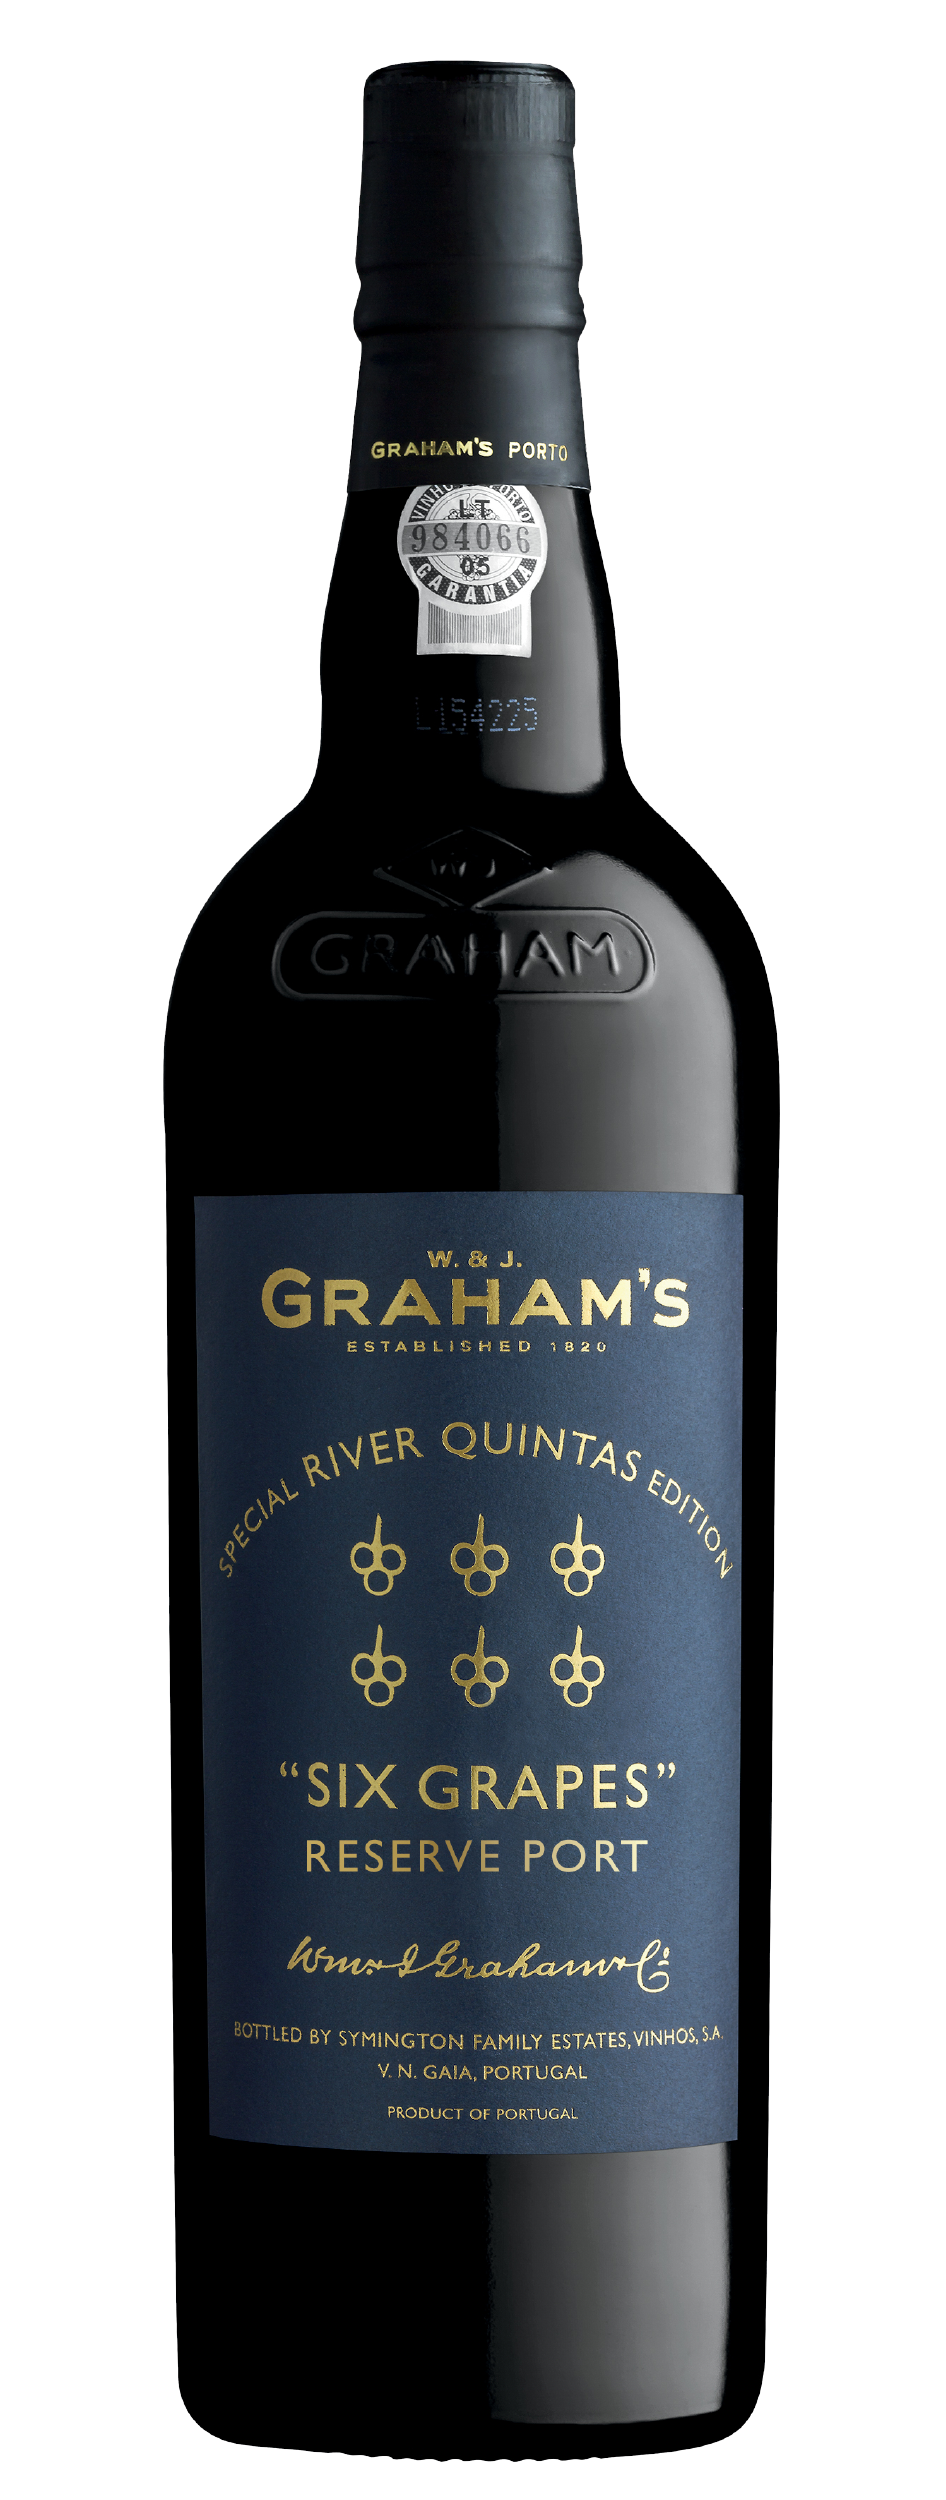 Product Image for GRAHAM'S SIX GRAPES SPECIAL 'RIVER QUINTAS' EDITION PORT